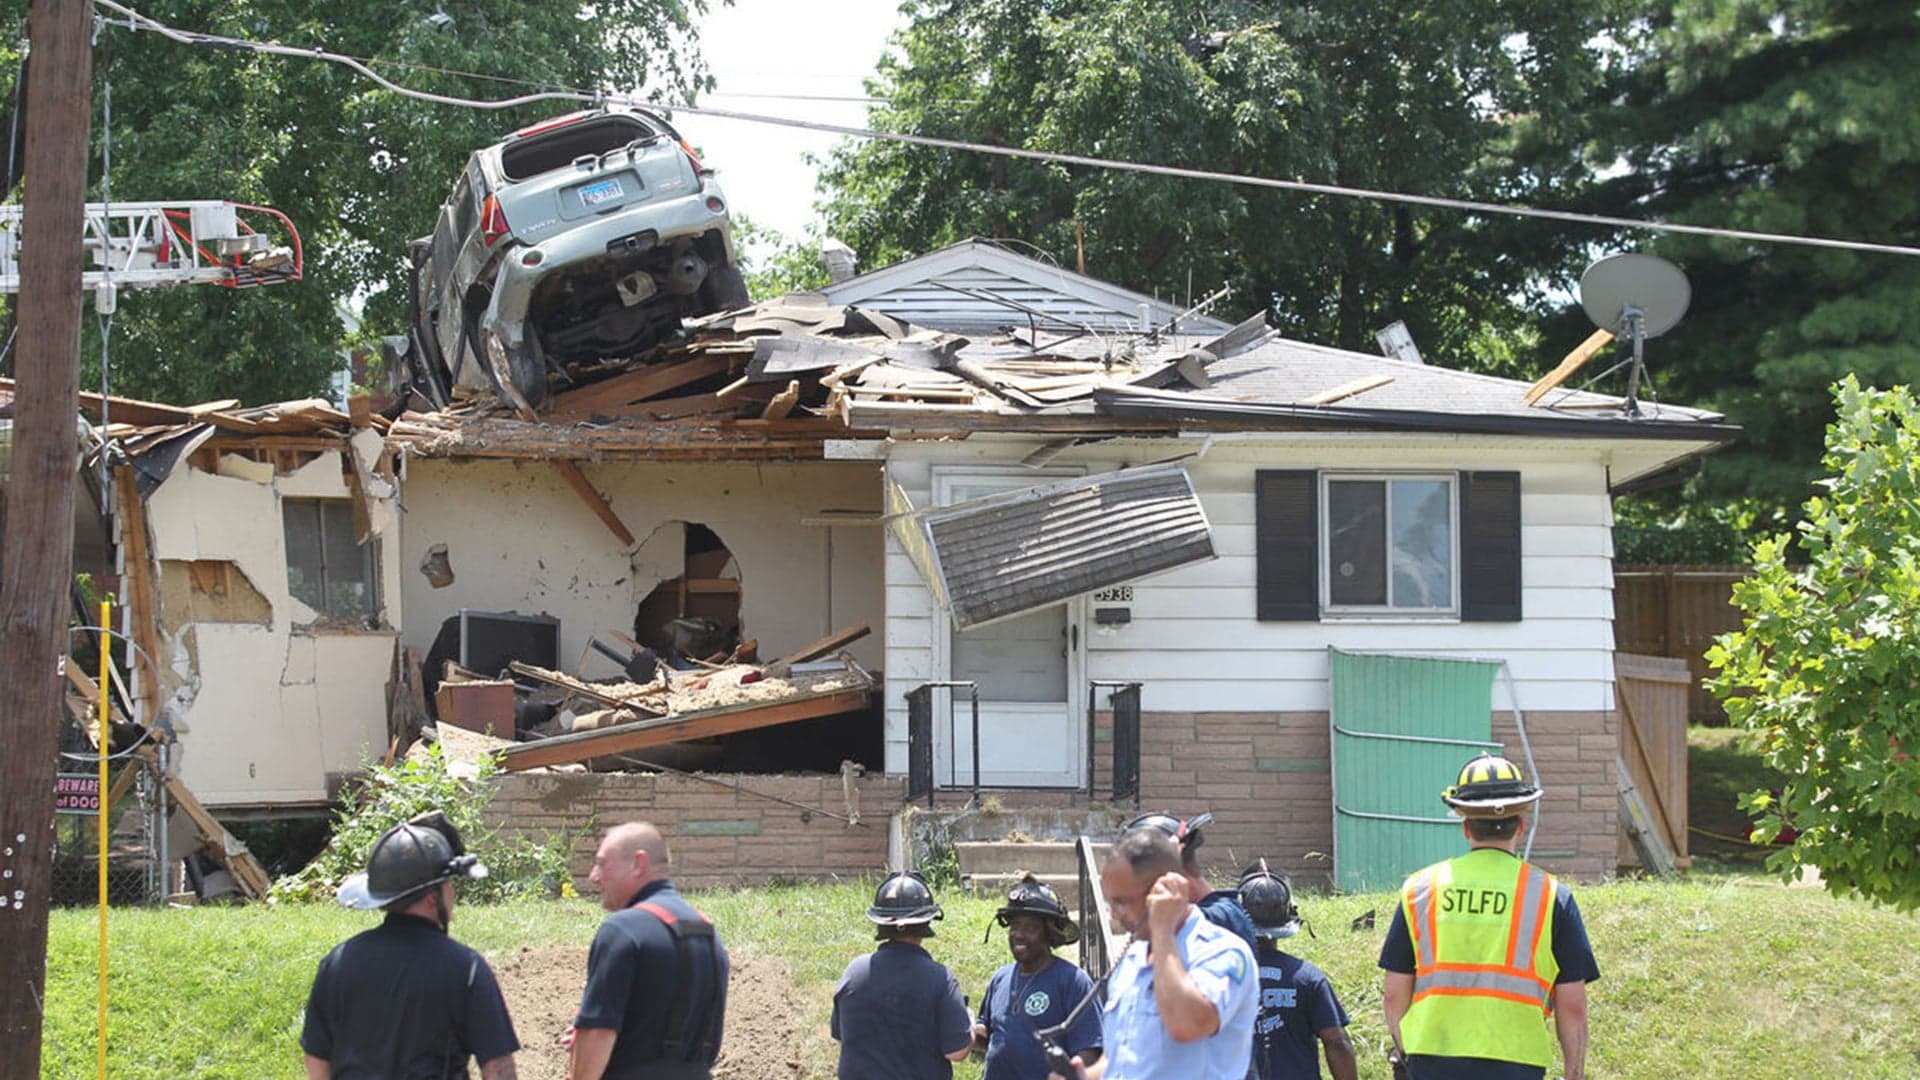 SUV Crashes on Roof of House in St. Louis